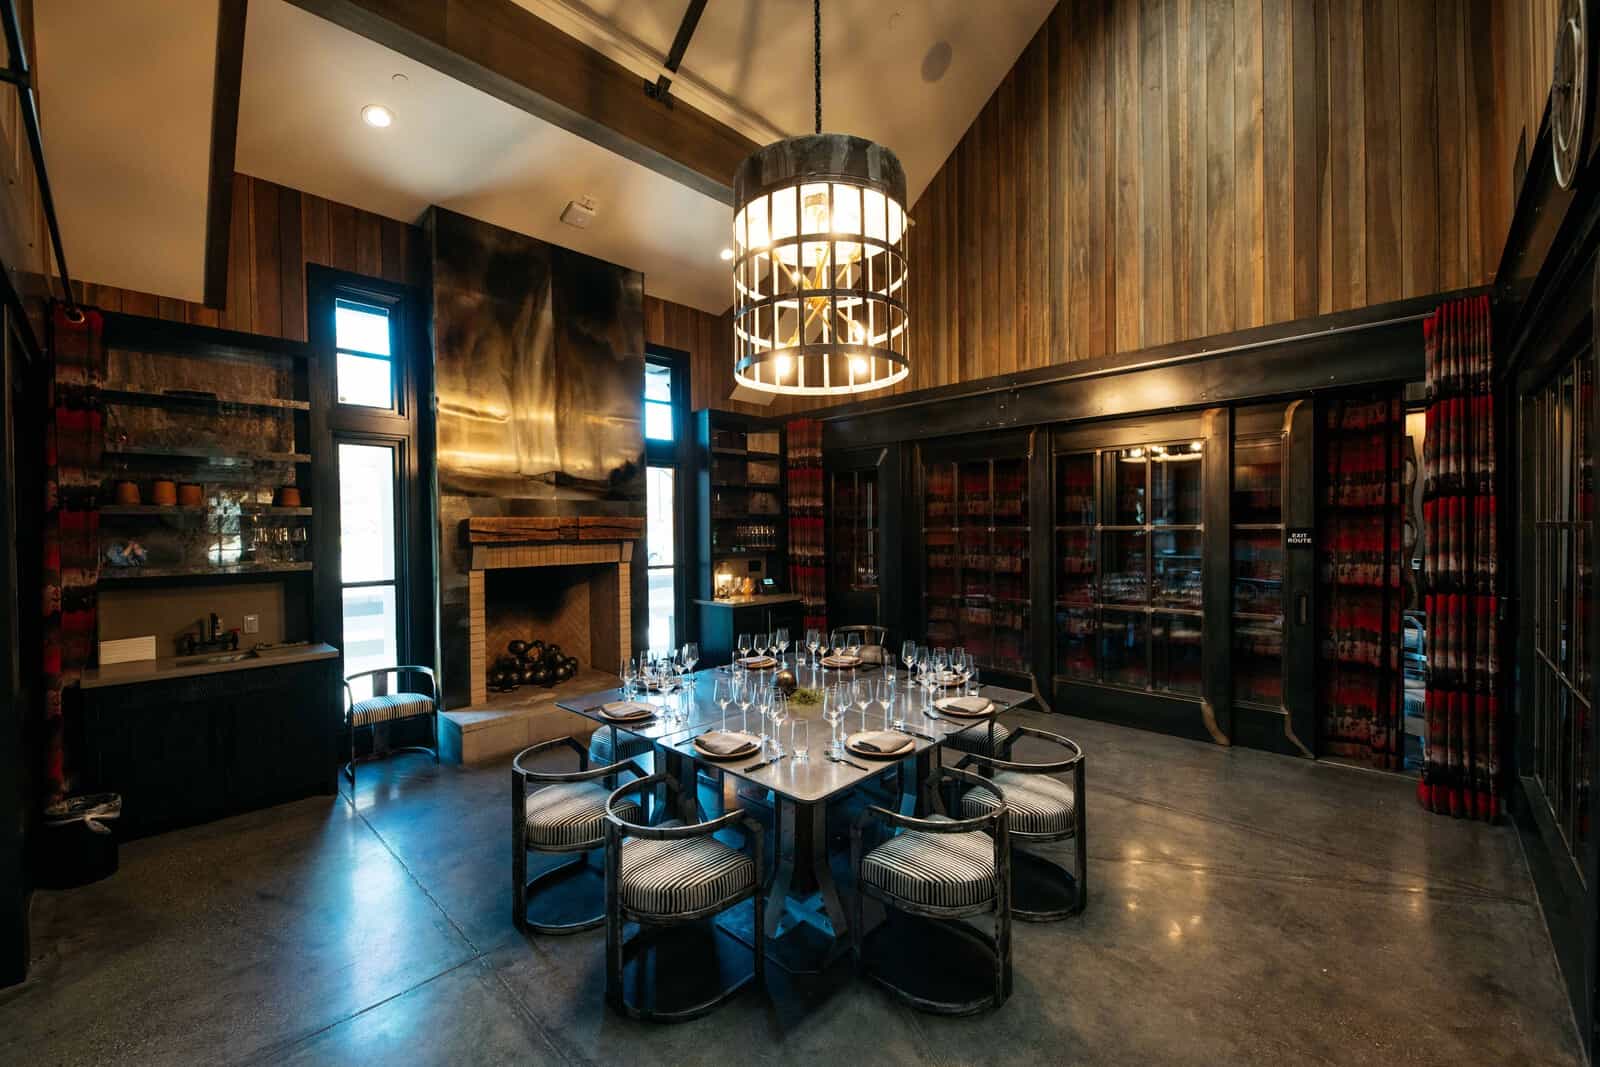 A dining and tasting room at a winery